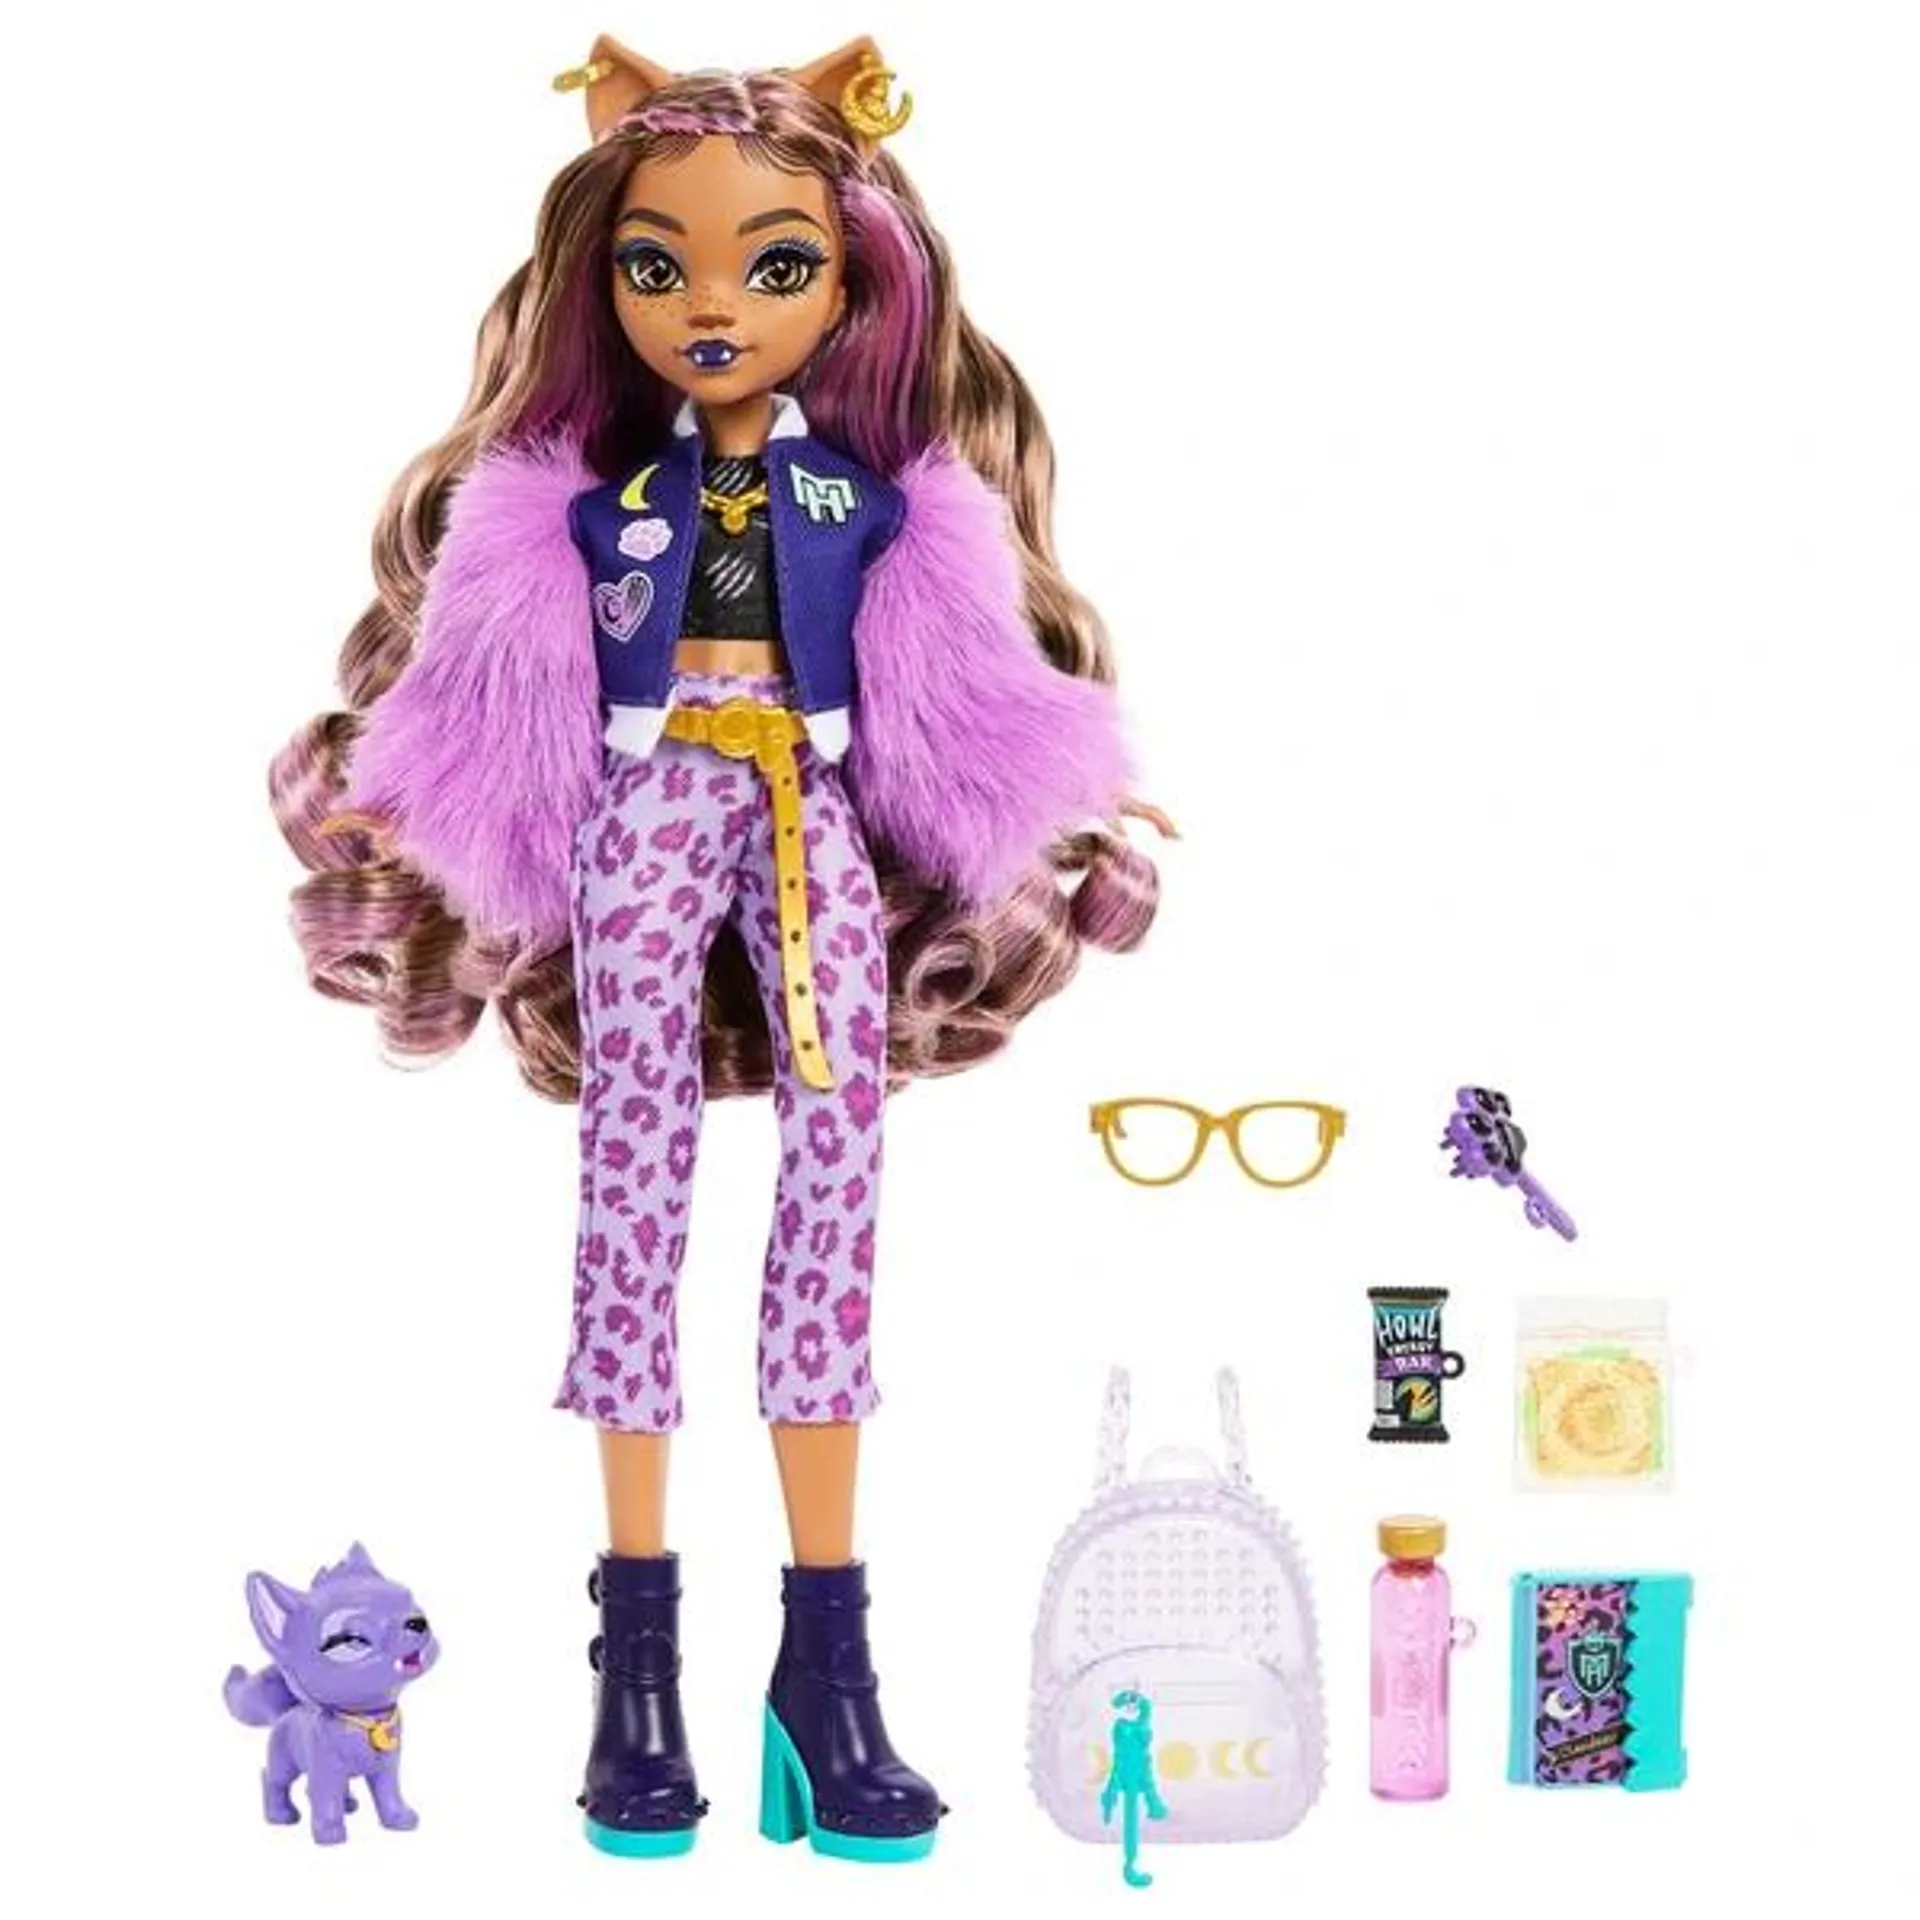 Monster High Clawdeen Wolf Doll with Pet and Accessories